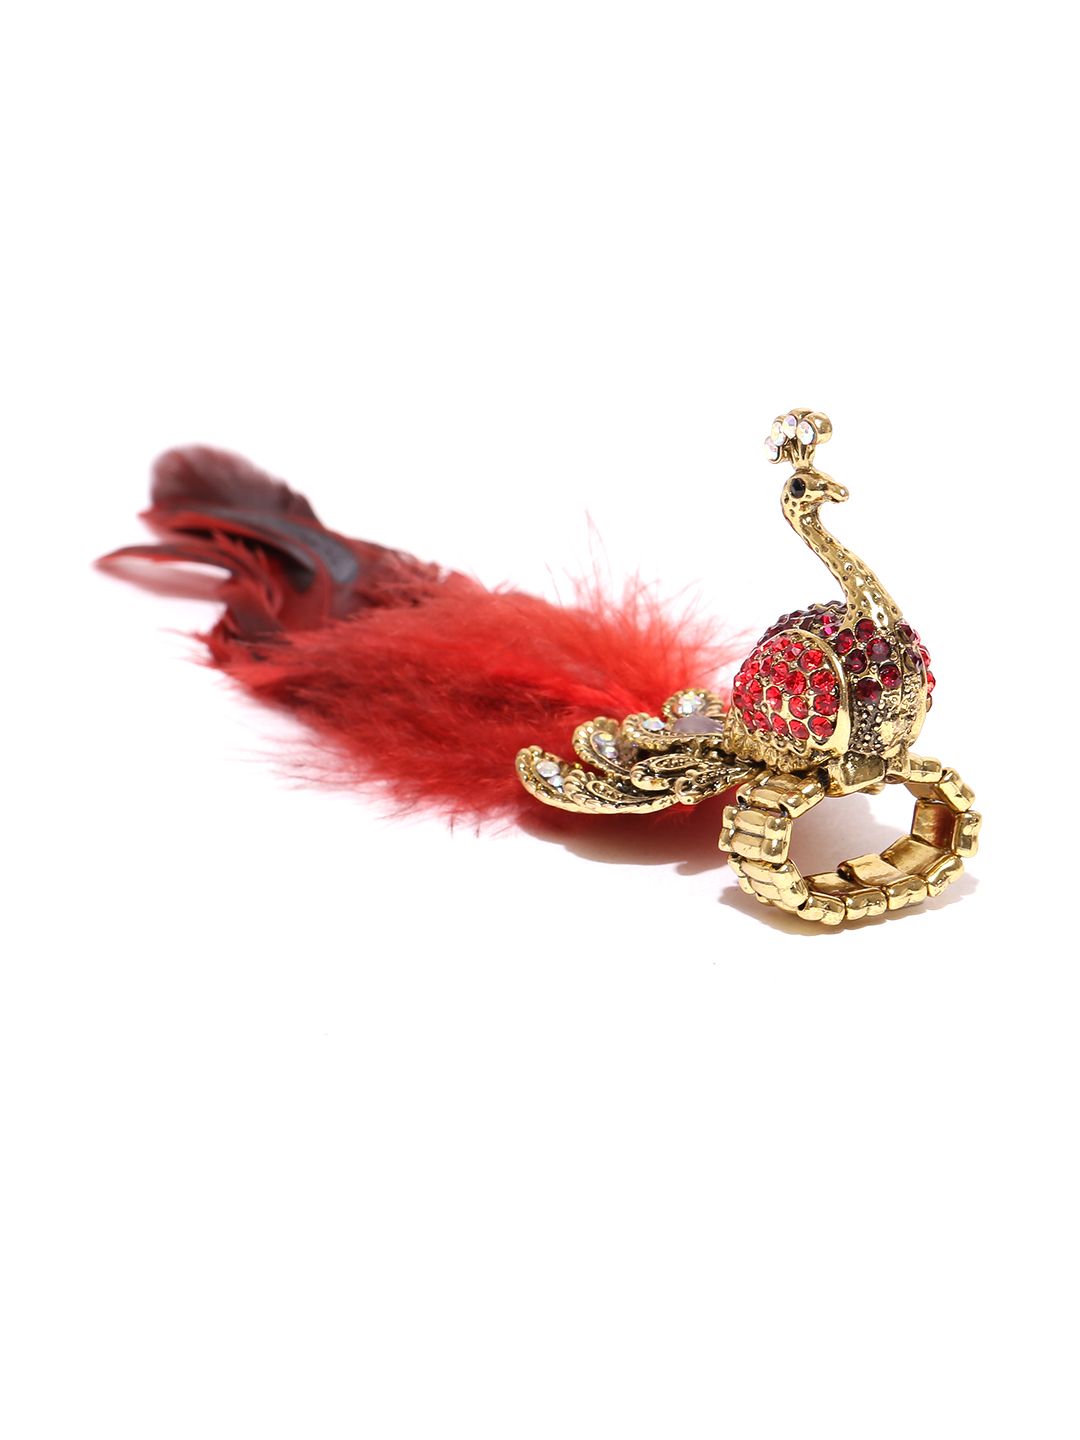 YouBella Antique Gold-Toned & Red Peacock-Shaped Stone-Studded Ring Price in India